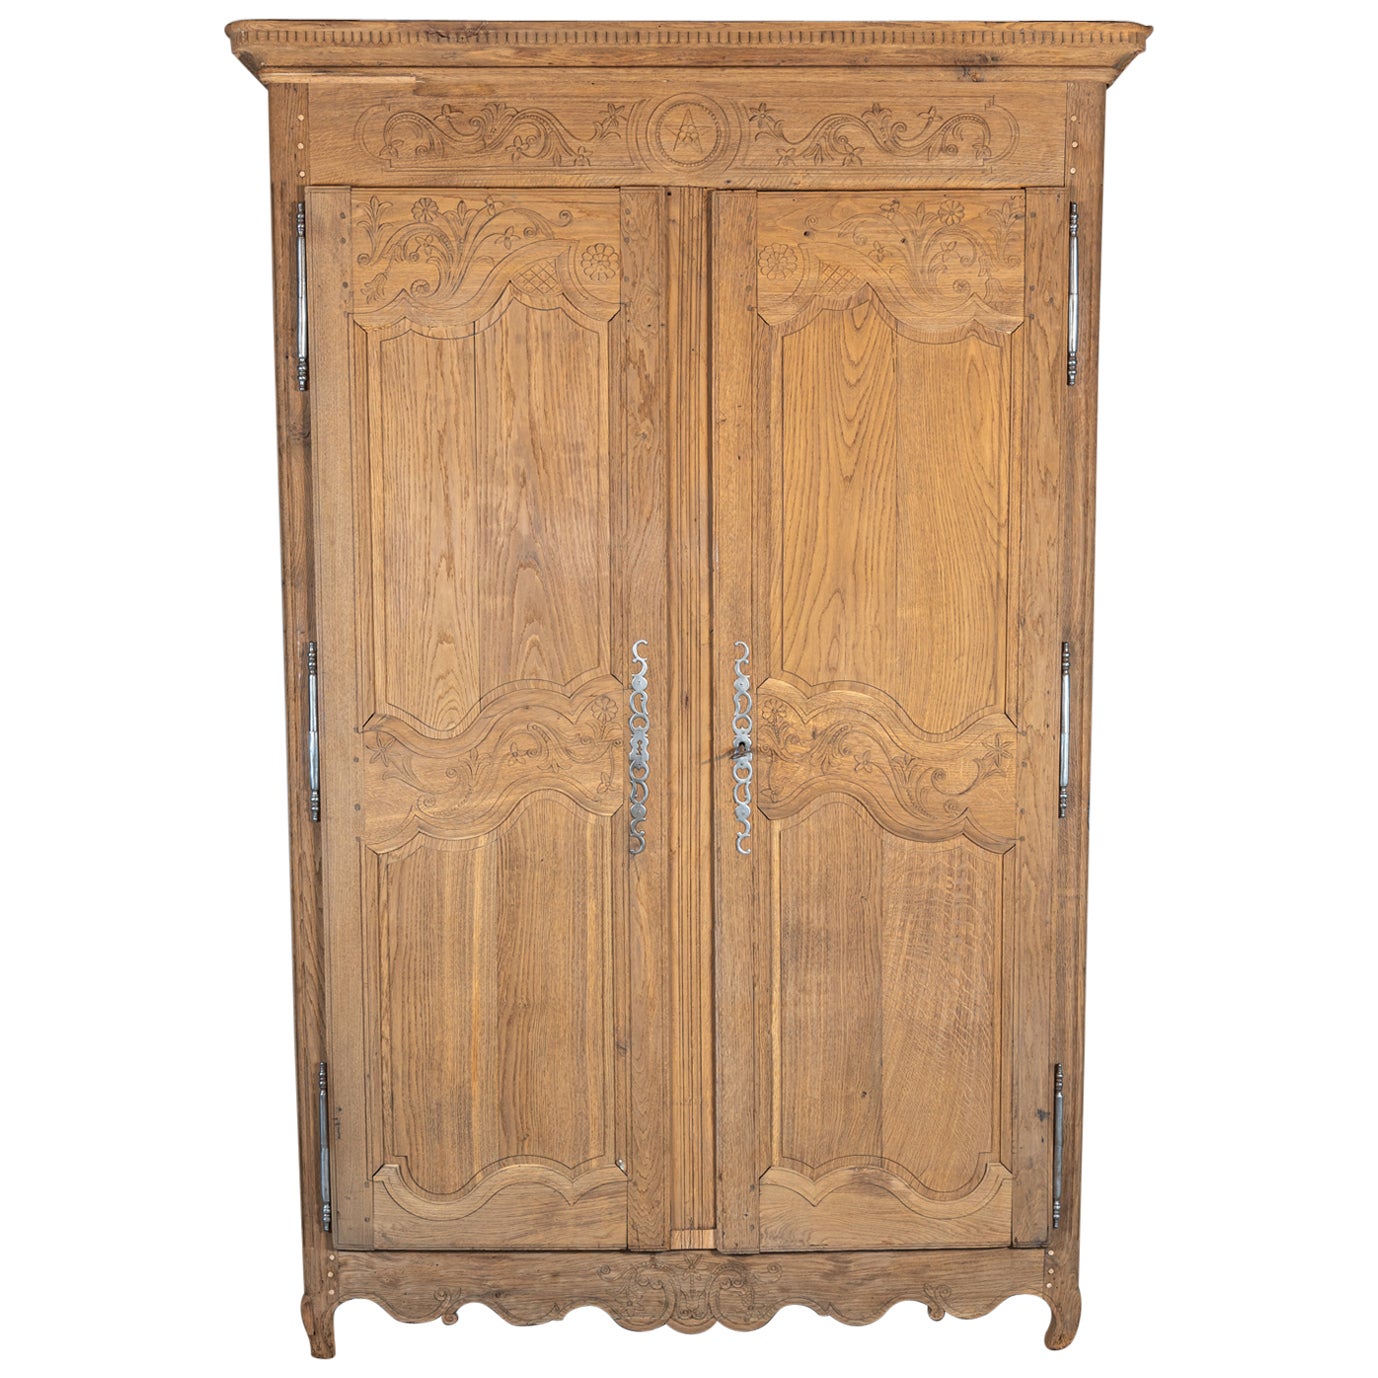 Experience the grandeur and elegance of this impressive 19th century French Louis XV Style armoire, now reimagined as a stunning bar cabinet. Meticulously restored by skilled craftsmen, this armoire has been professionally cleaned, sanded, and